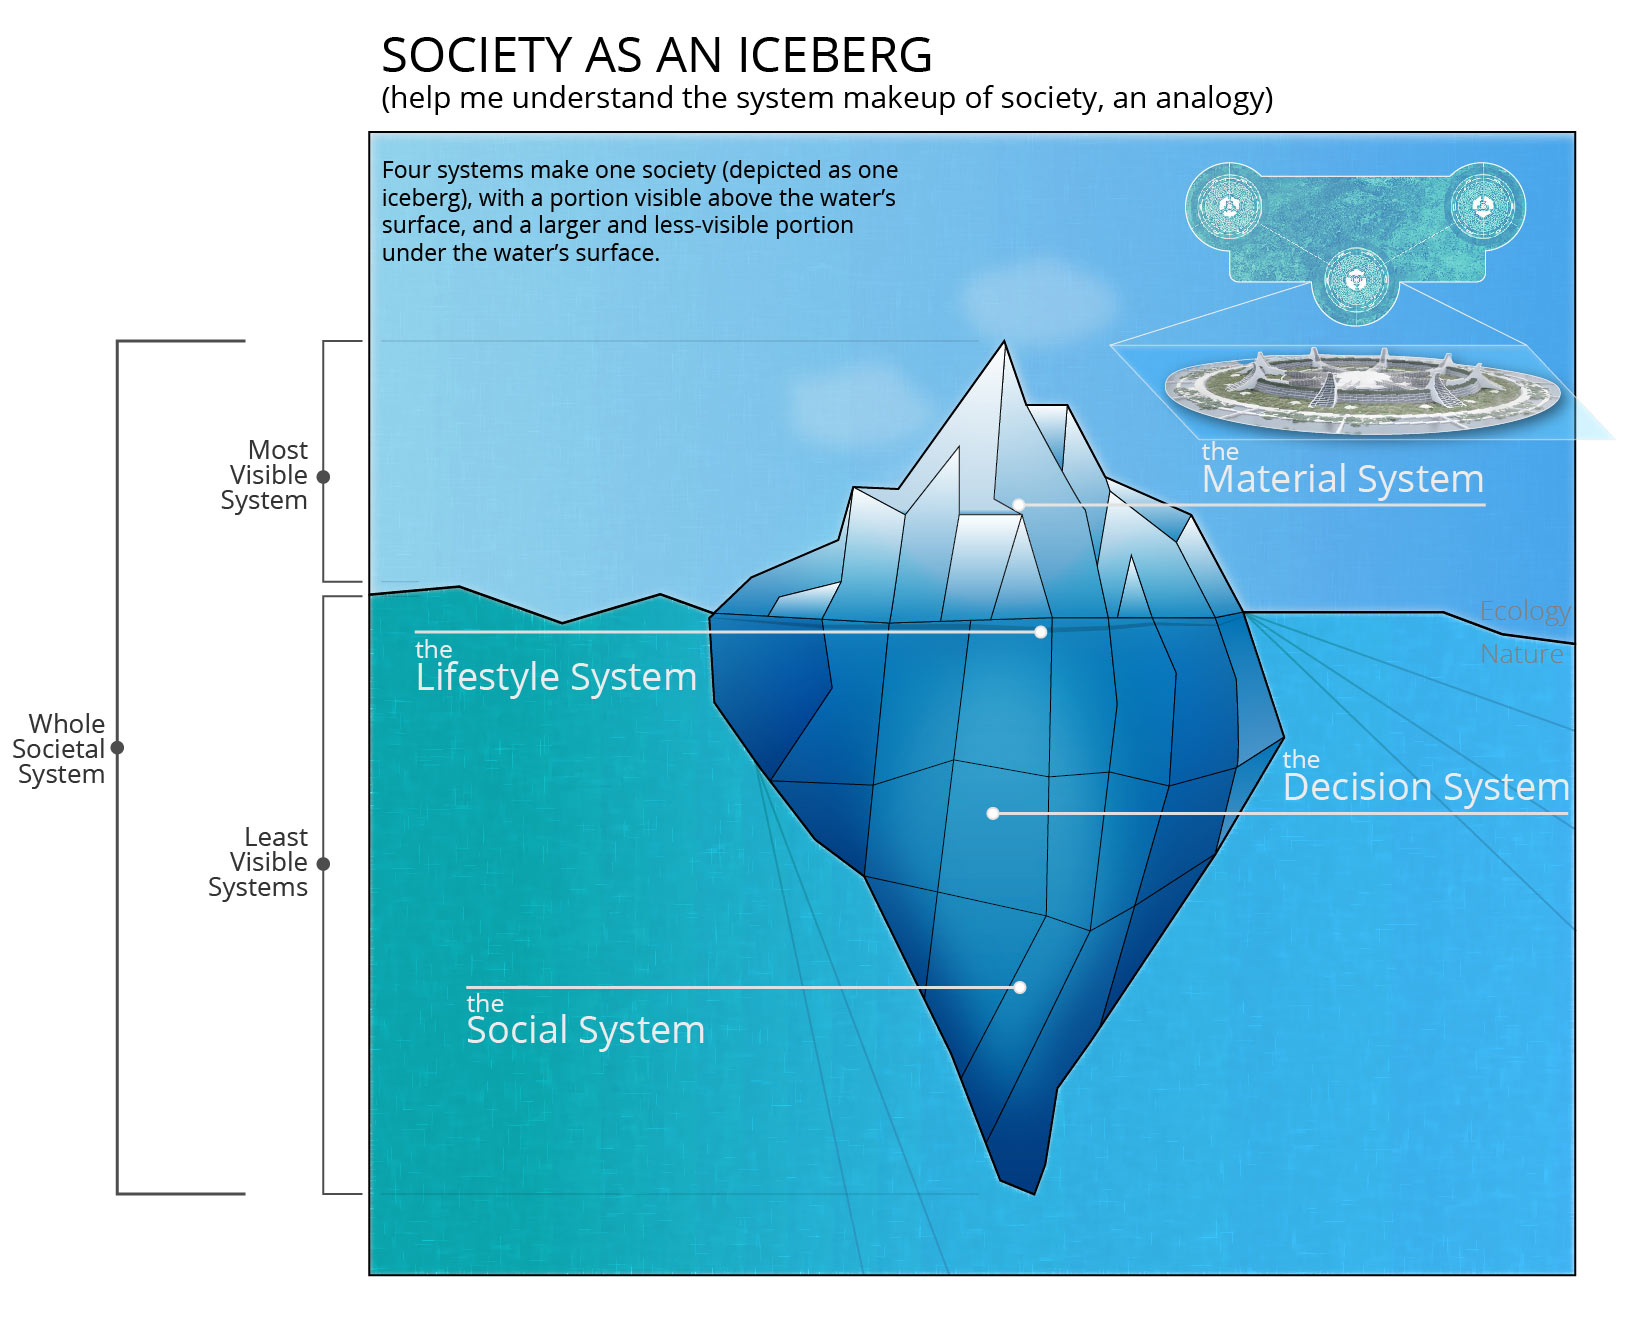 Iceberg analogy of society showing the material, decision, social, and lifestyle systems